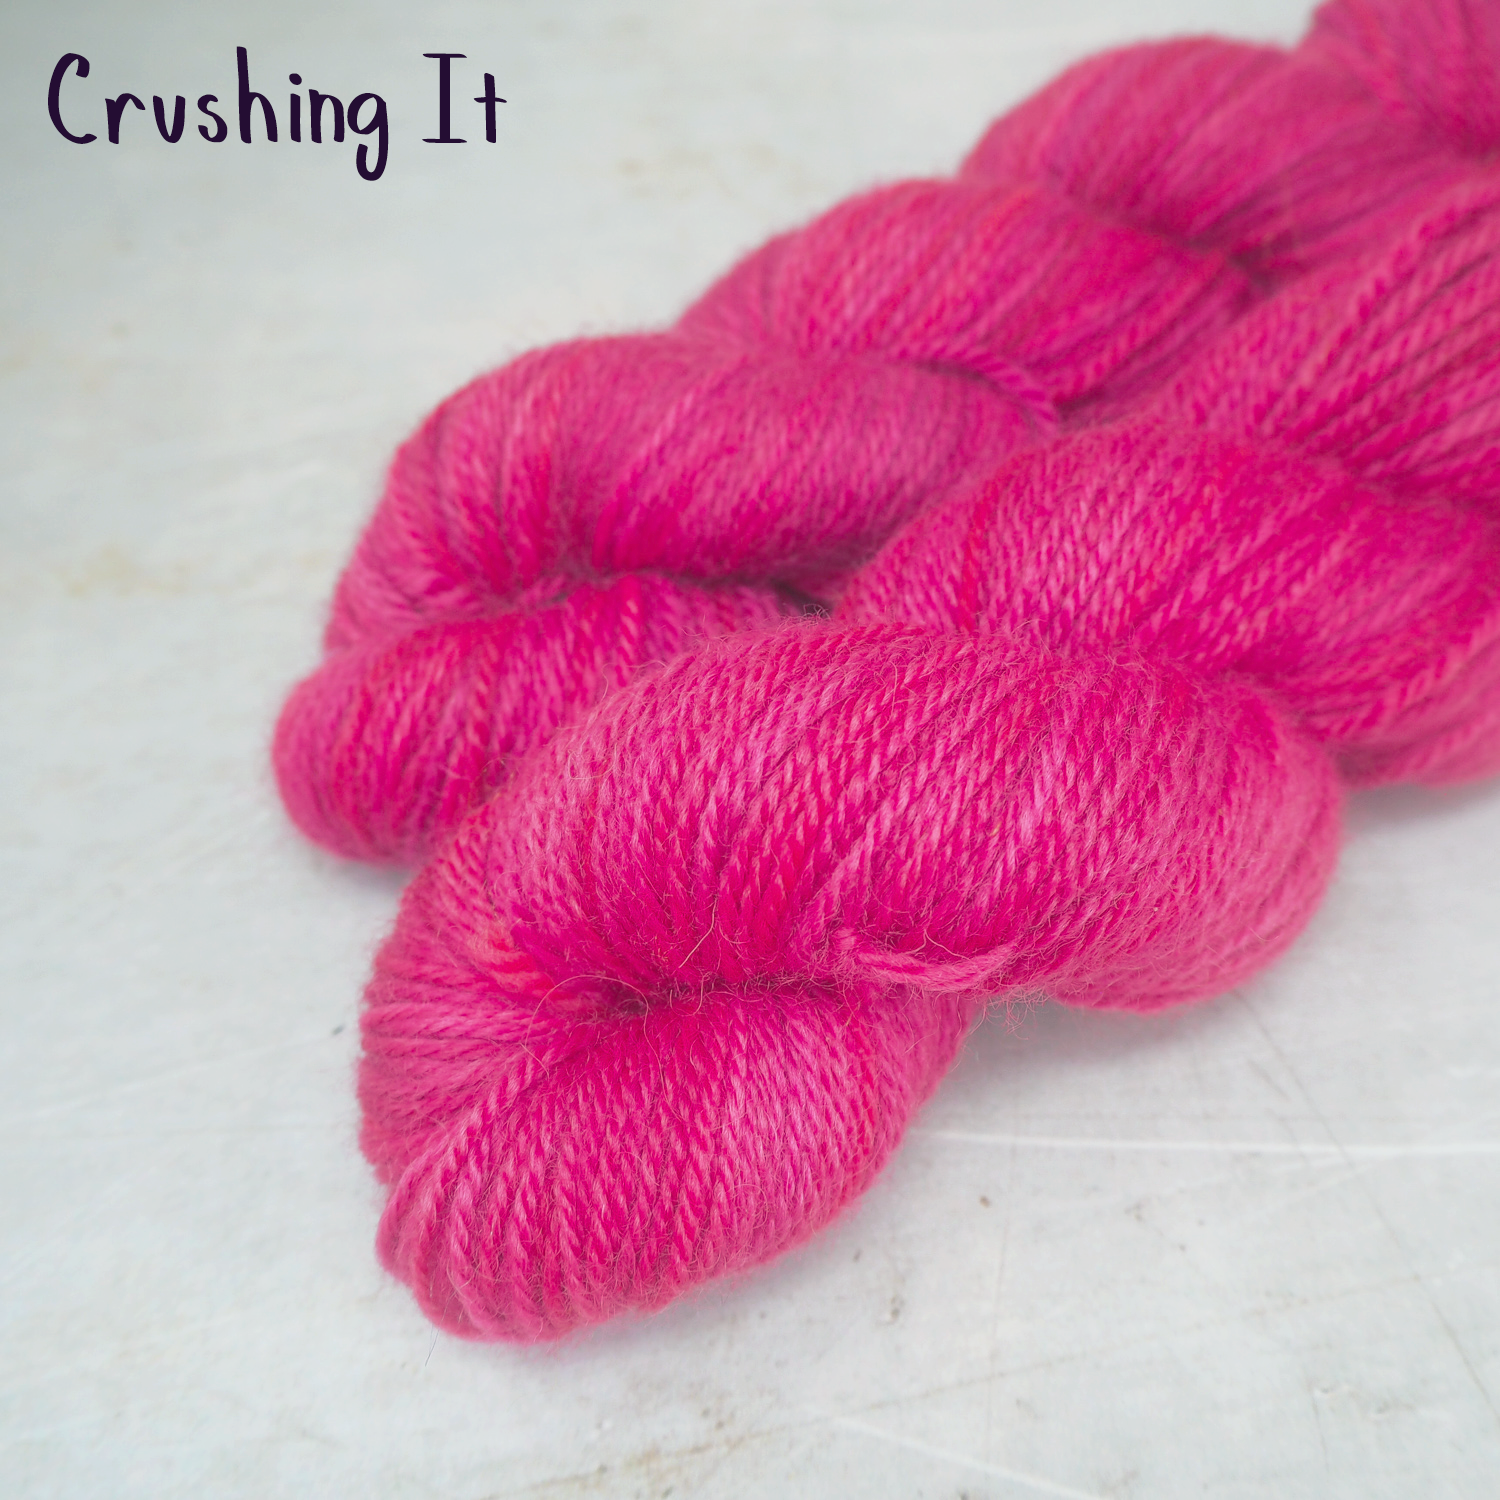 Two skeins of soft, DK weight hand-dyed yarn in hot pink. 